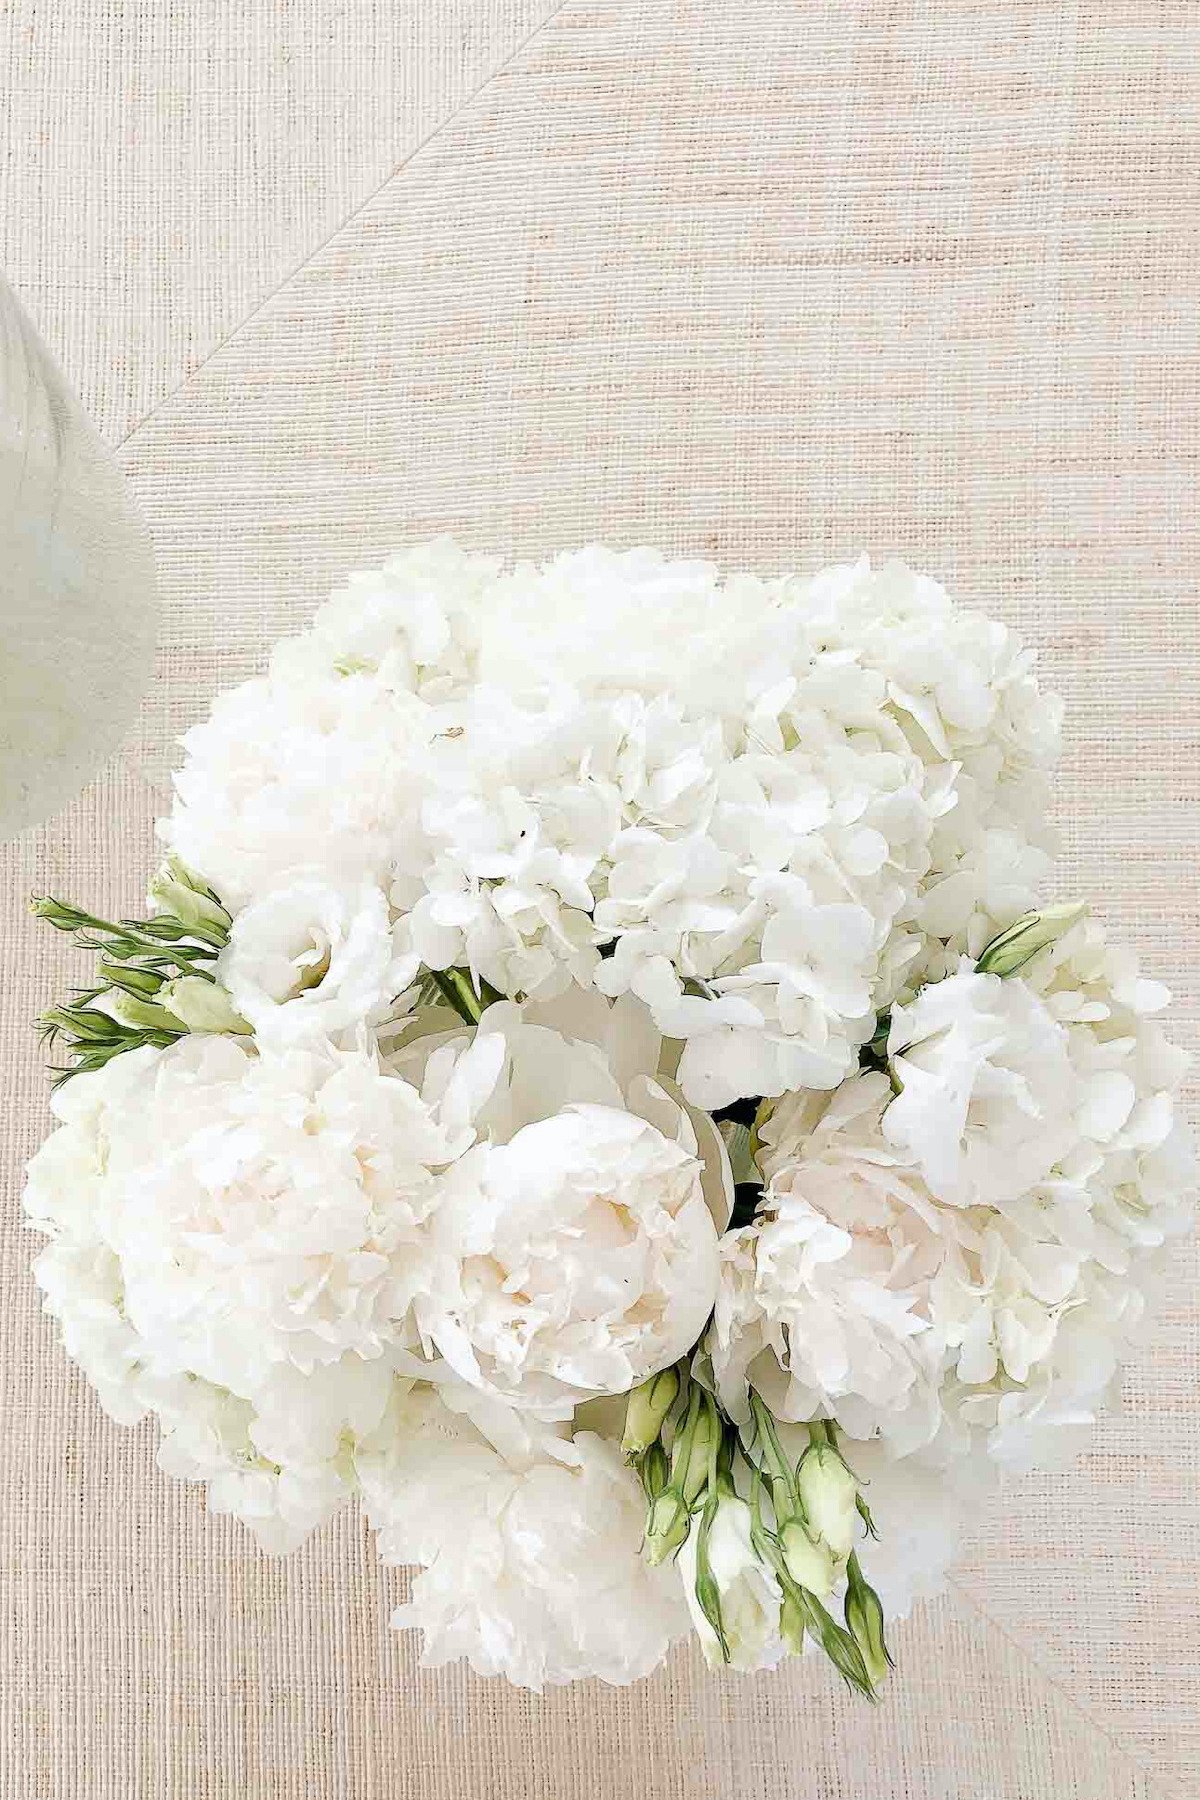 White hydrangea flowers in a vase on a table.